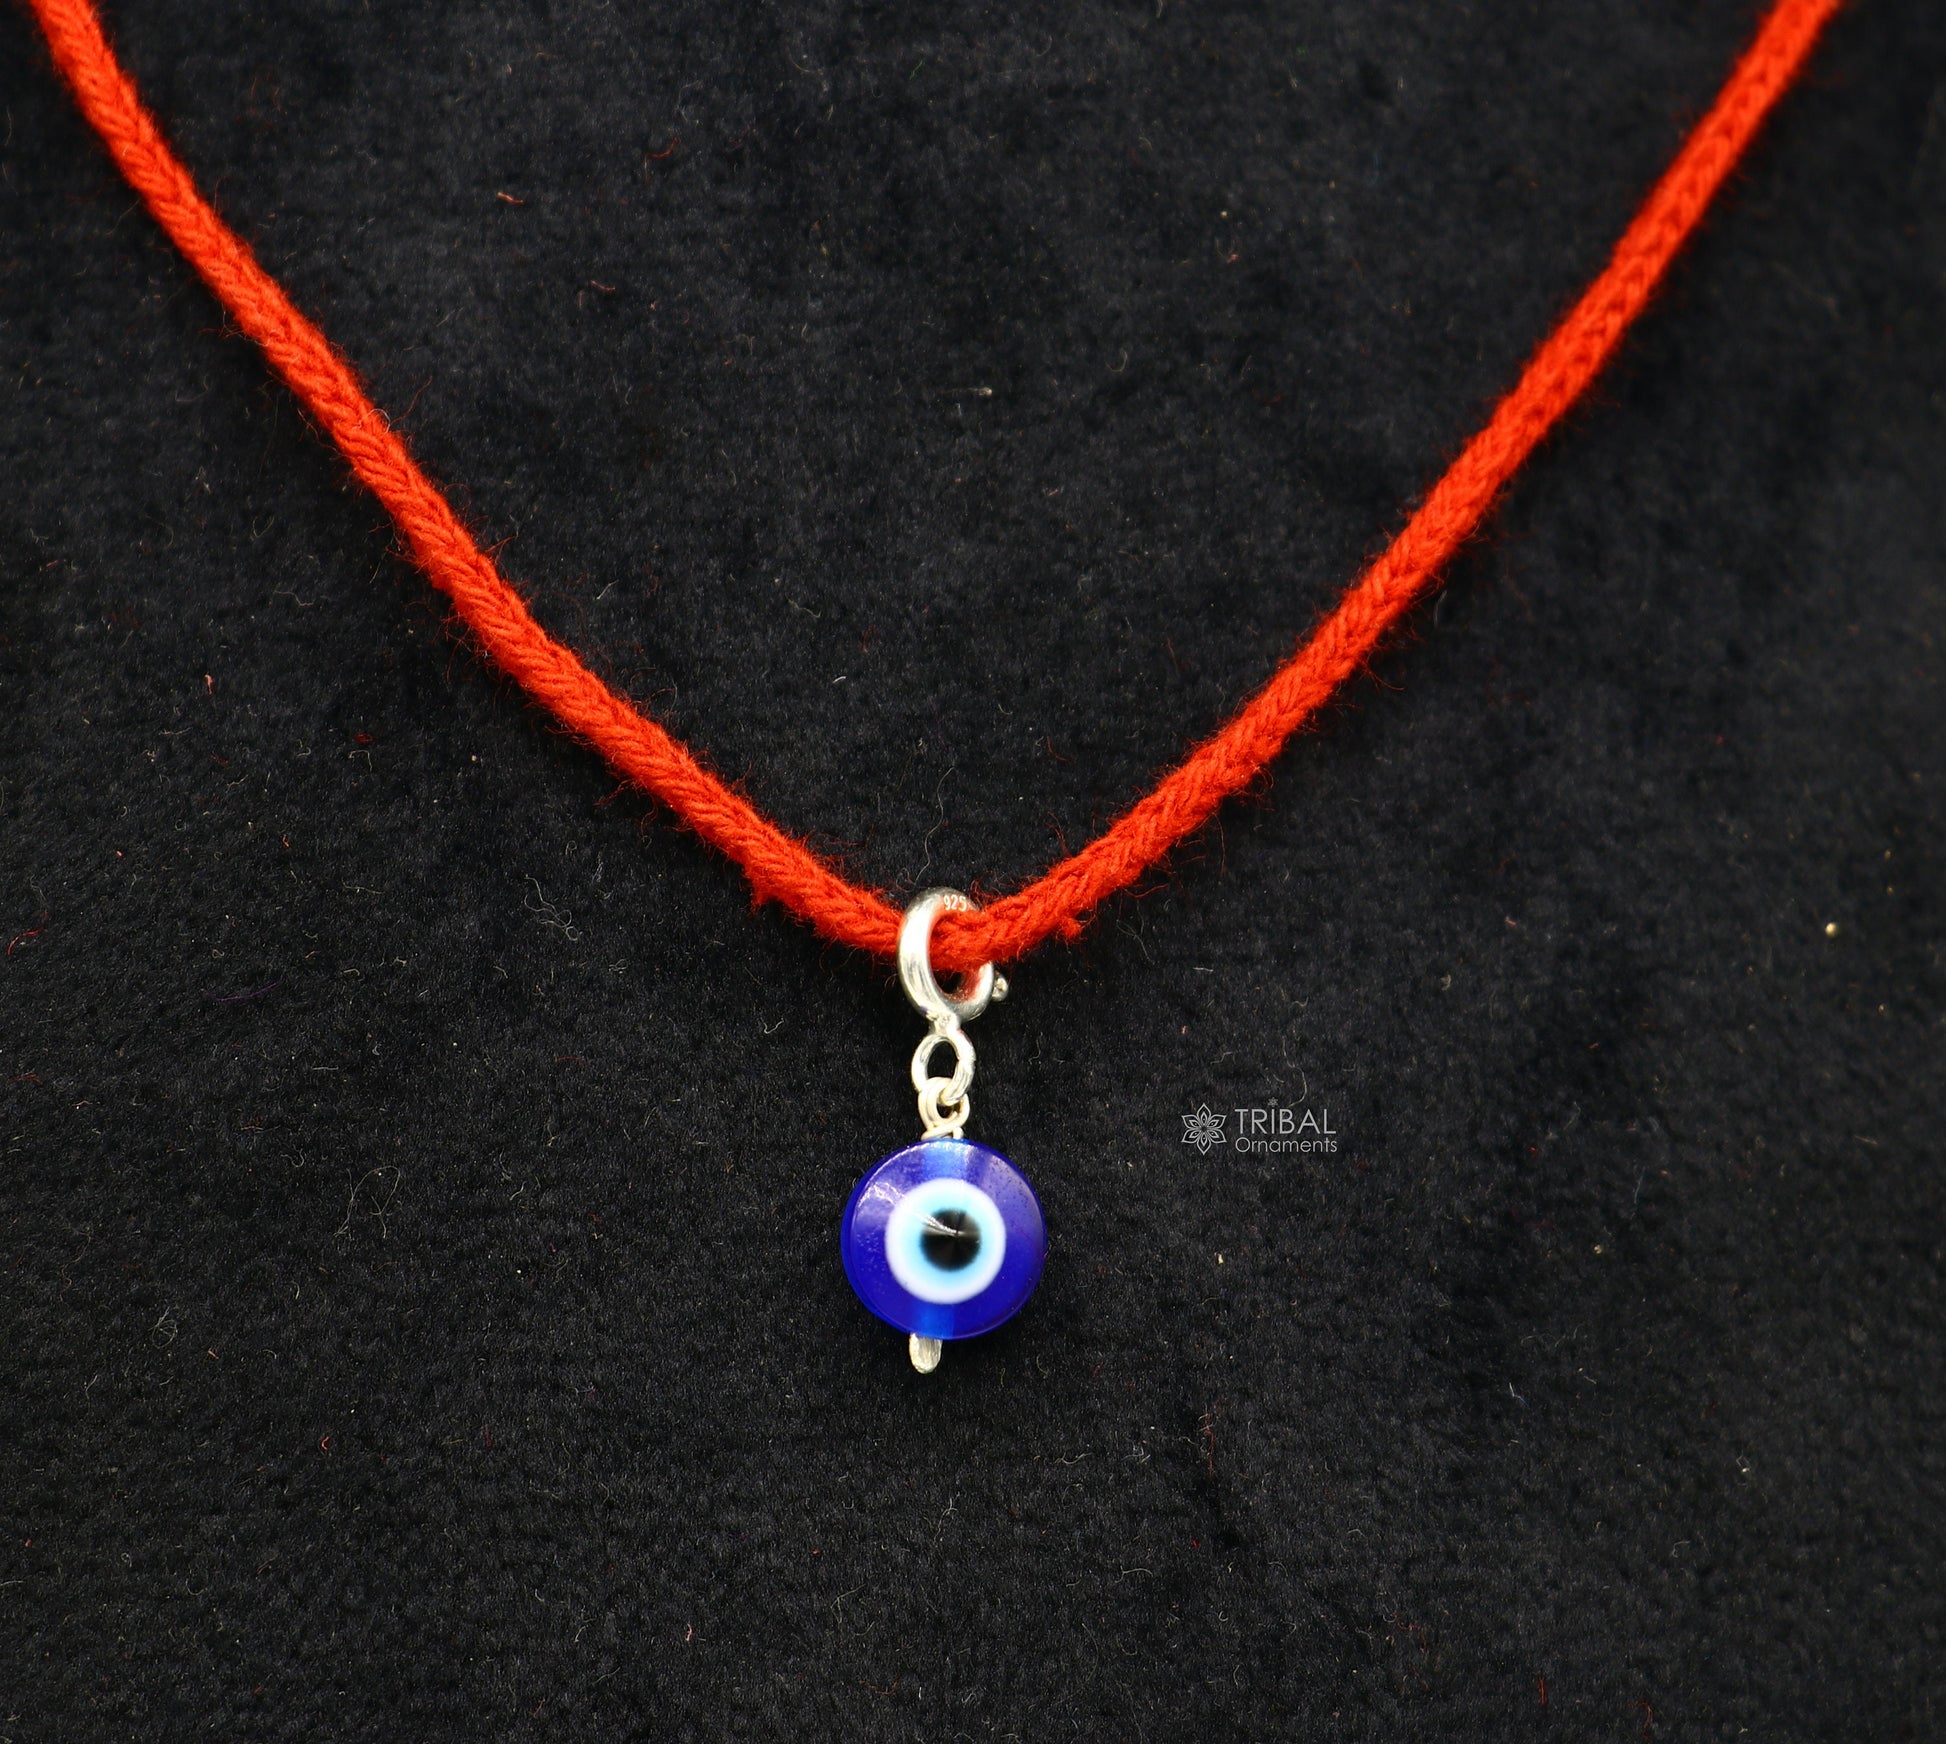 925 Sterling silver evil eye handmade Pendant amazing customized drop dangle evil eyes jewelry for girl's kids or baby's  nsp620 - TRIBAL ORNAMENTS